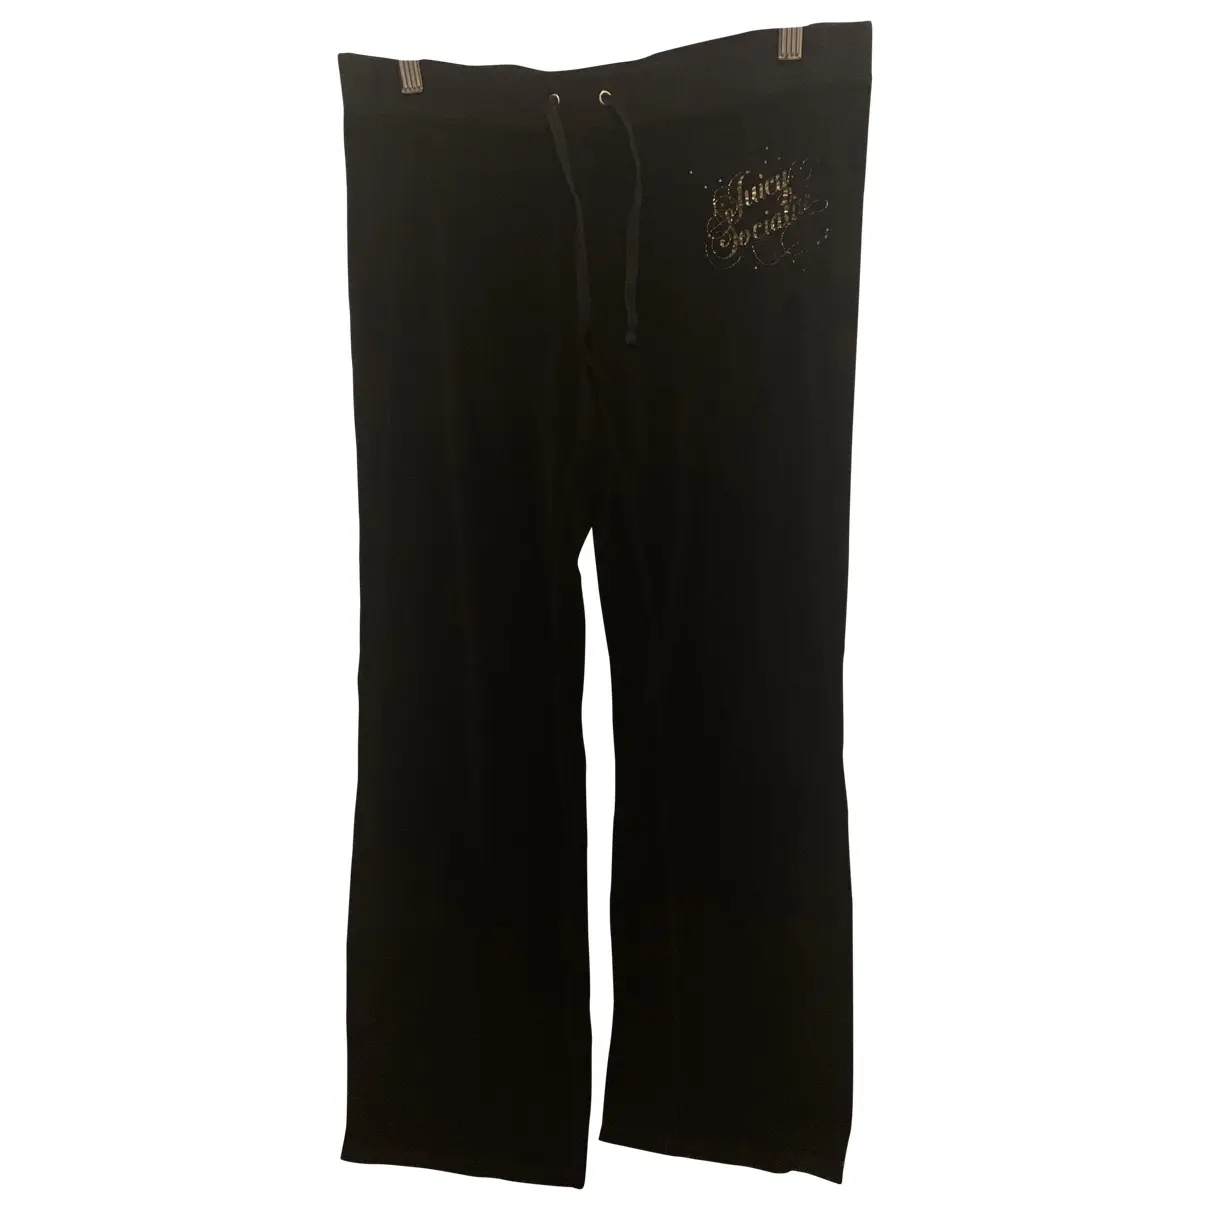 Trousers Juicy Couture